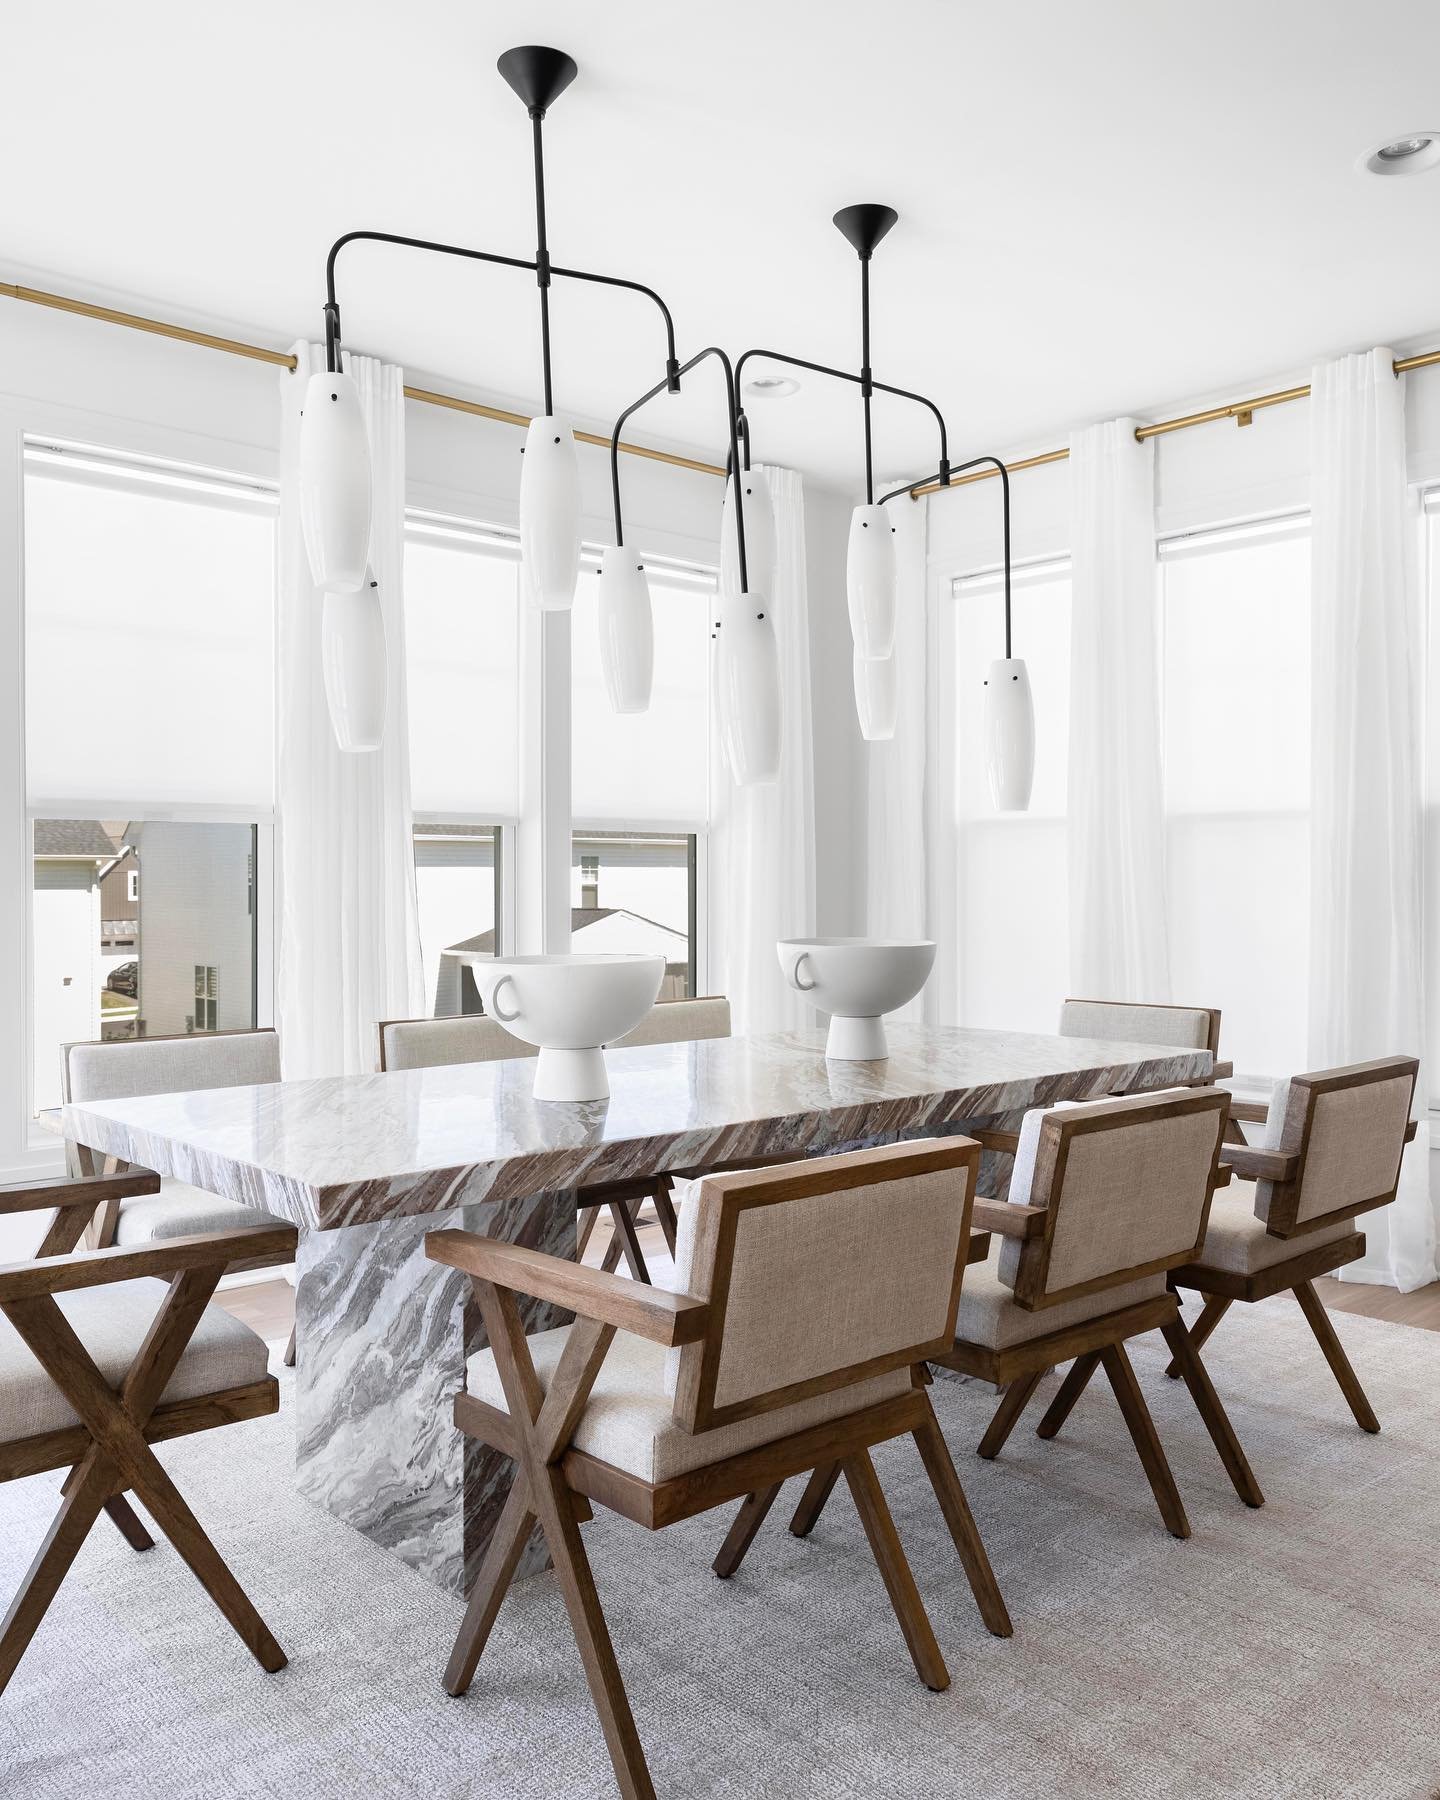 What dining room dreams are made of. 🖤 We&rsquo;ve transformed this space into one that you can&rsquo;t help but want to gather around any night of the week. As designers, that&rsquo;s one of our favorite things: creating spaces that bring people to